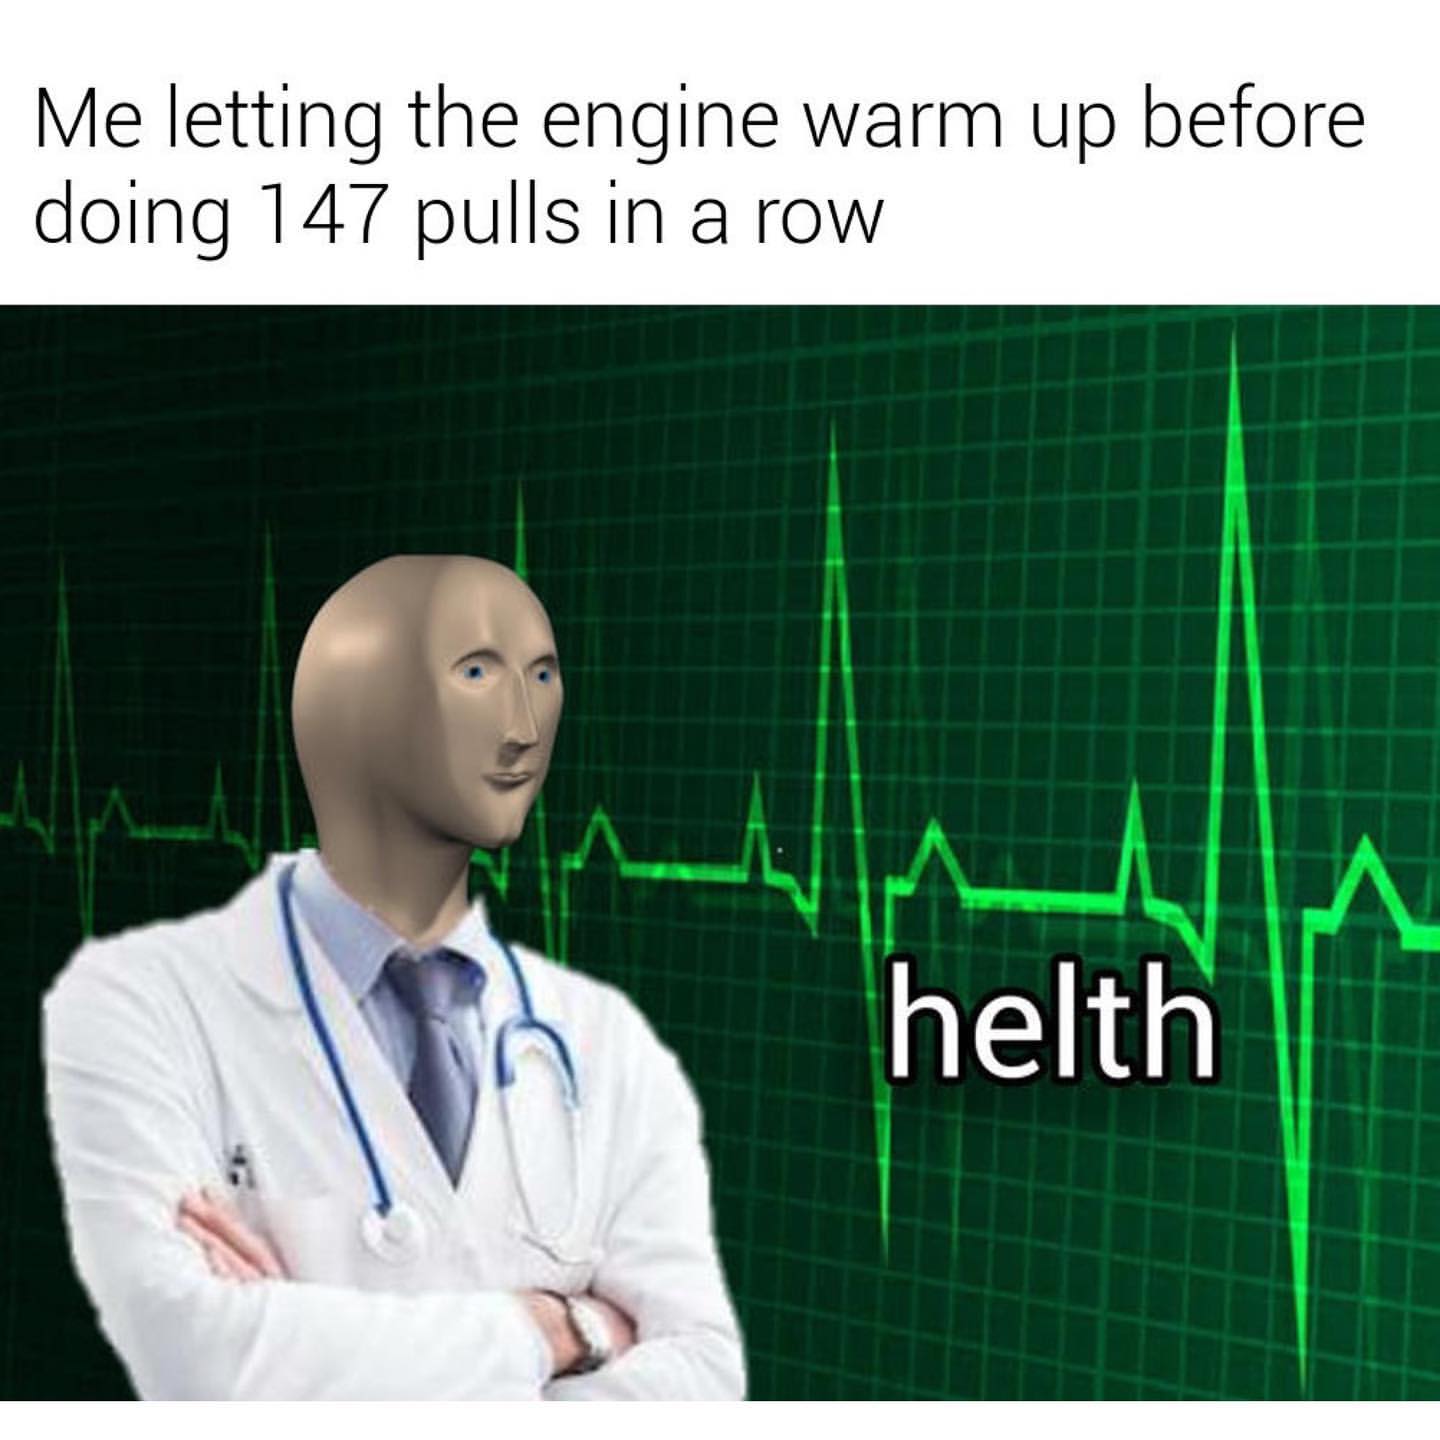 Me letting the engine warm up before doing 147 pulls in a row, helth.